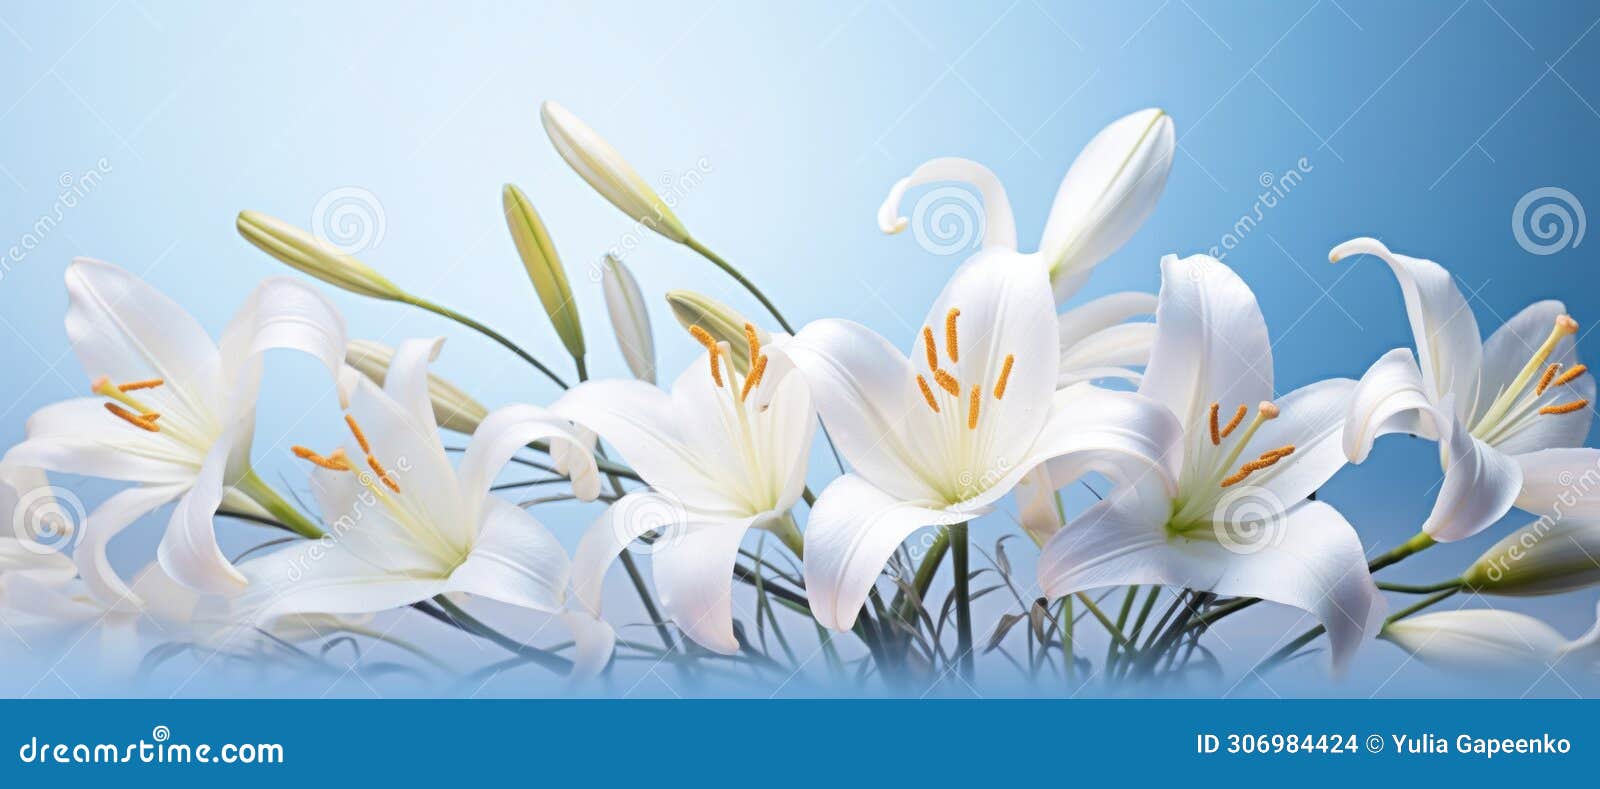 lilies of white flowers and lily grass on a bright bluewhite background,